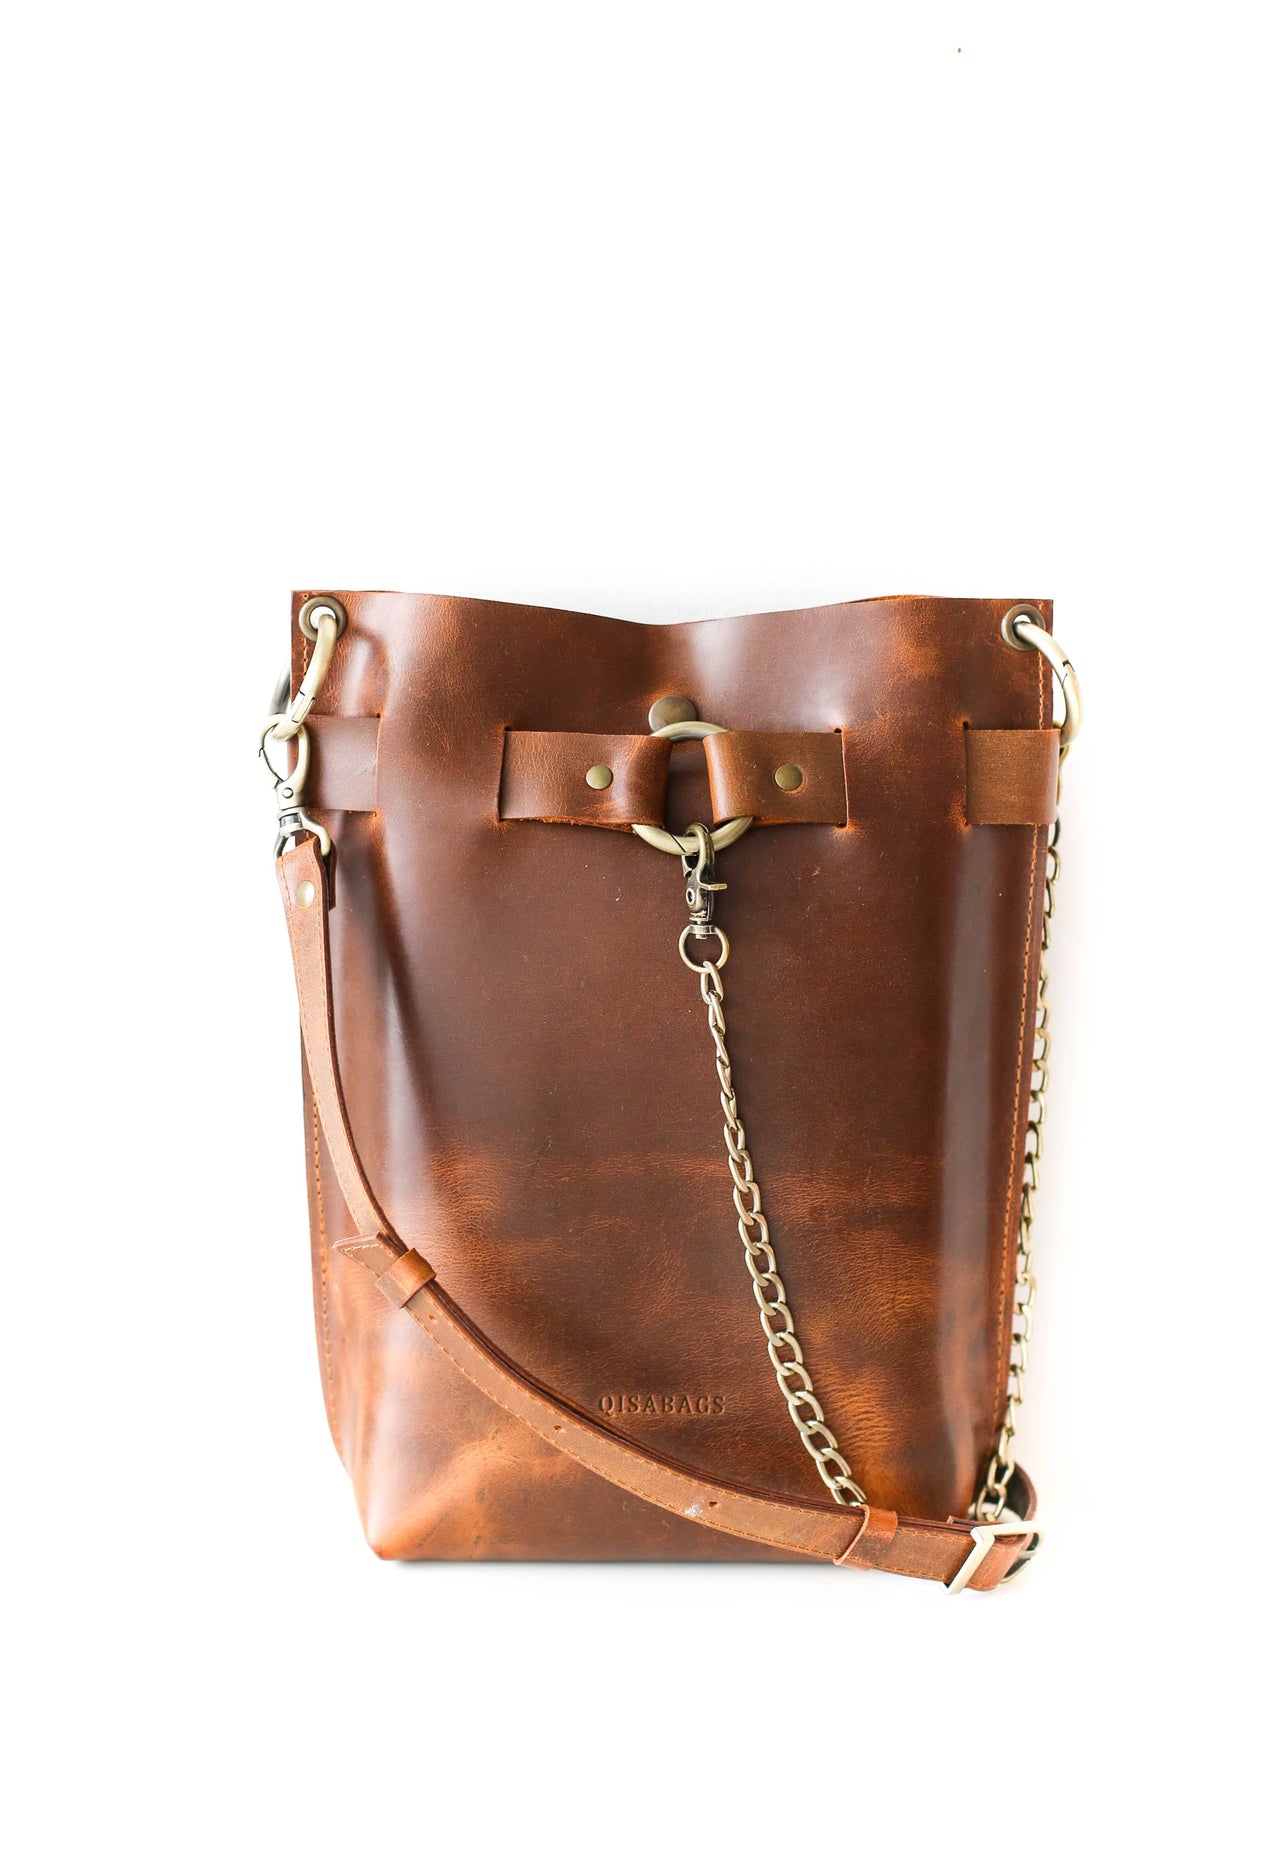 Coffee Brown Leather Bag - "Ring Belt Edition"